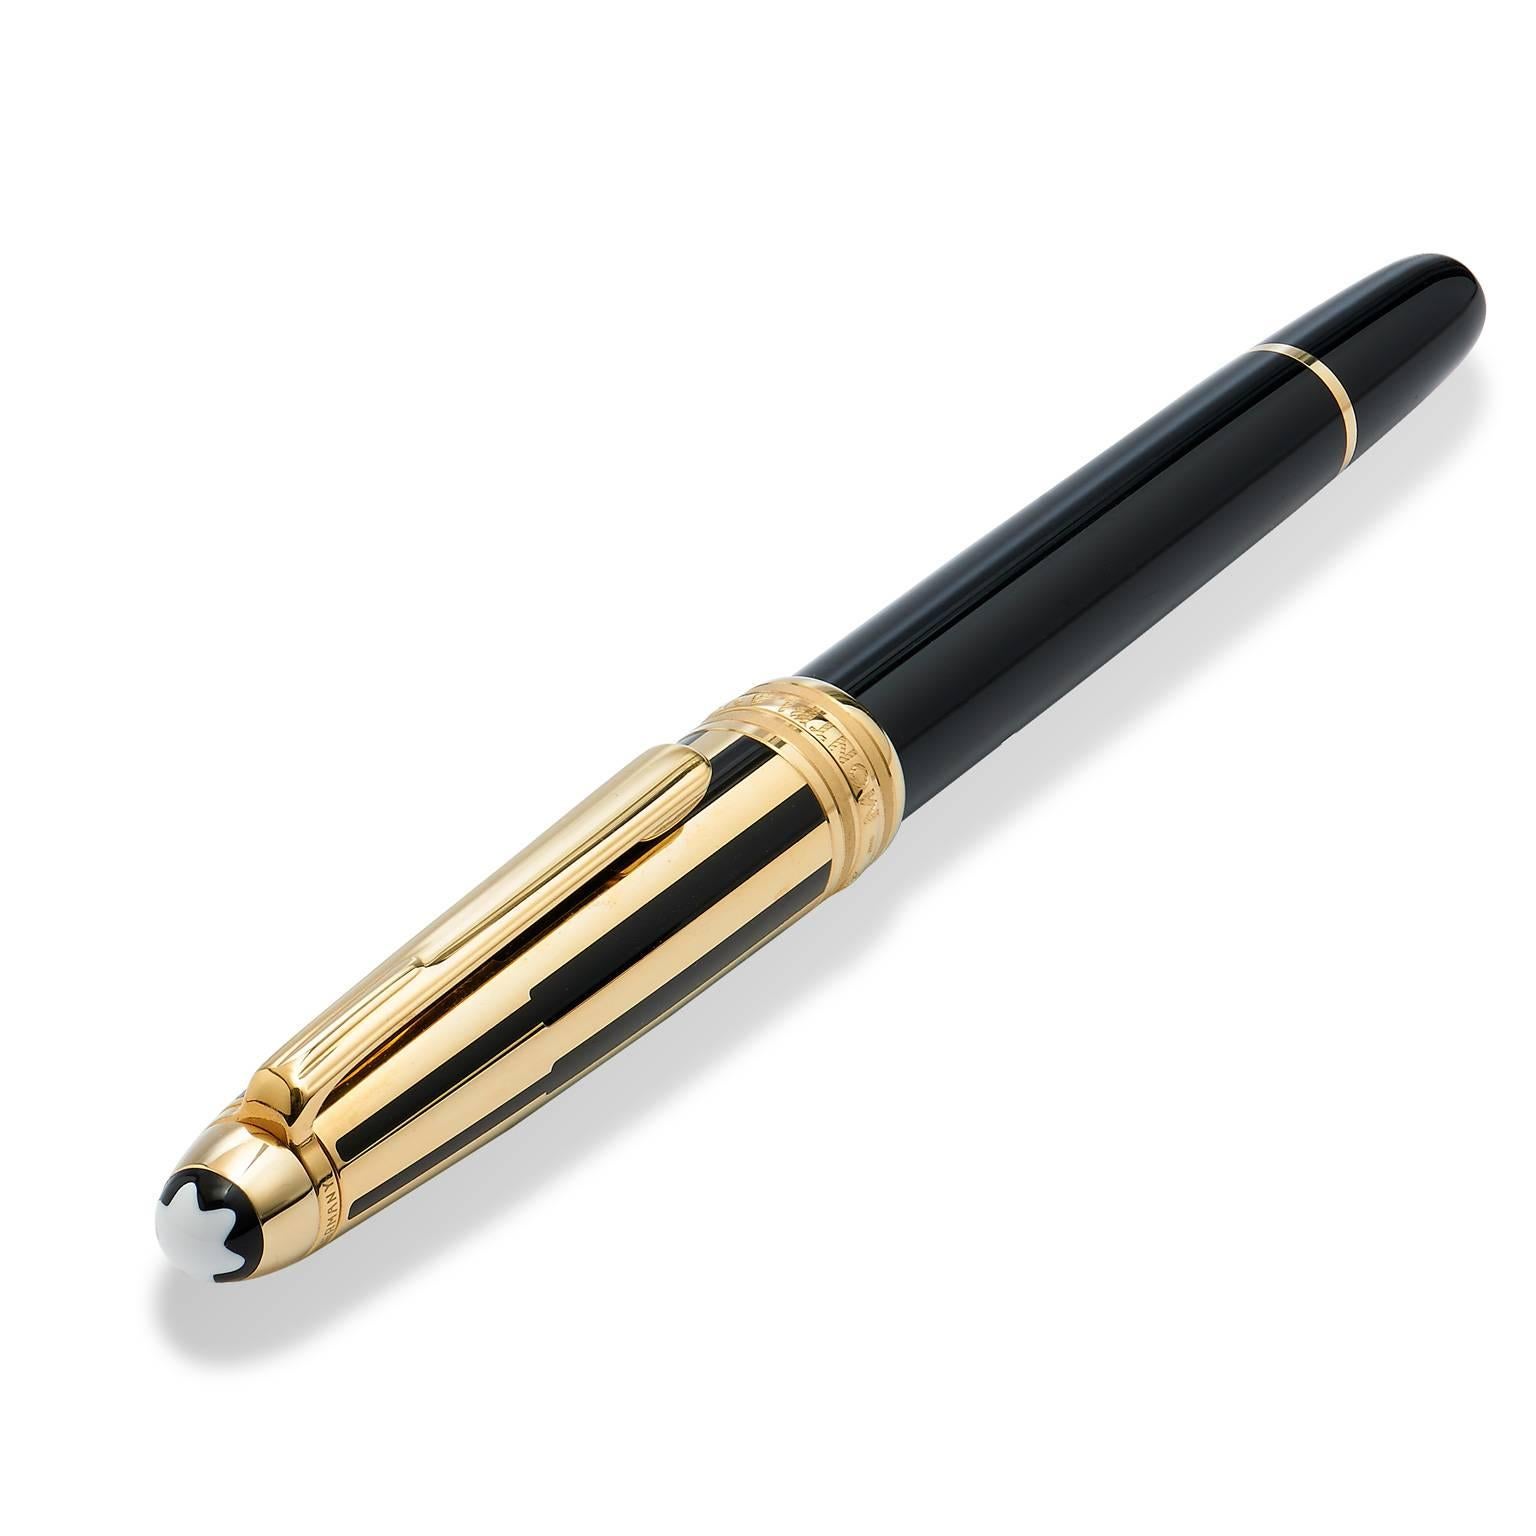 Mont Blanc is a brand that is synonymous with corporate luxury. This Mont Blanc Meisterstuck classique rollerball pen is gold plated with black laquer. Original Retail Price: $625. Our Price: $500